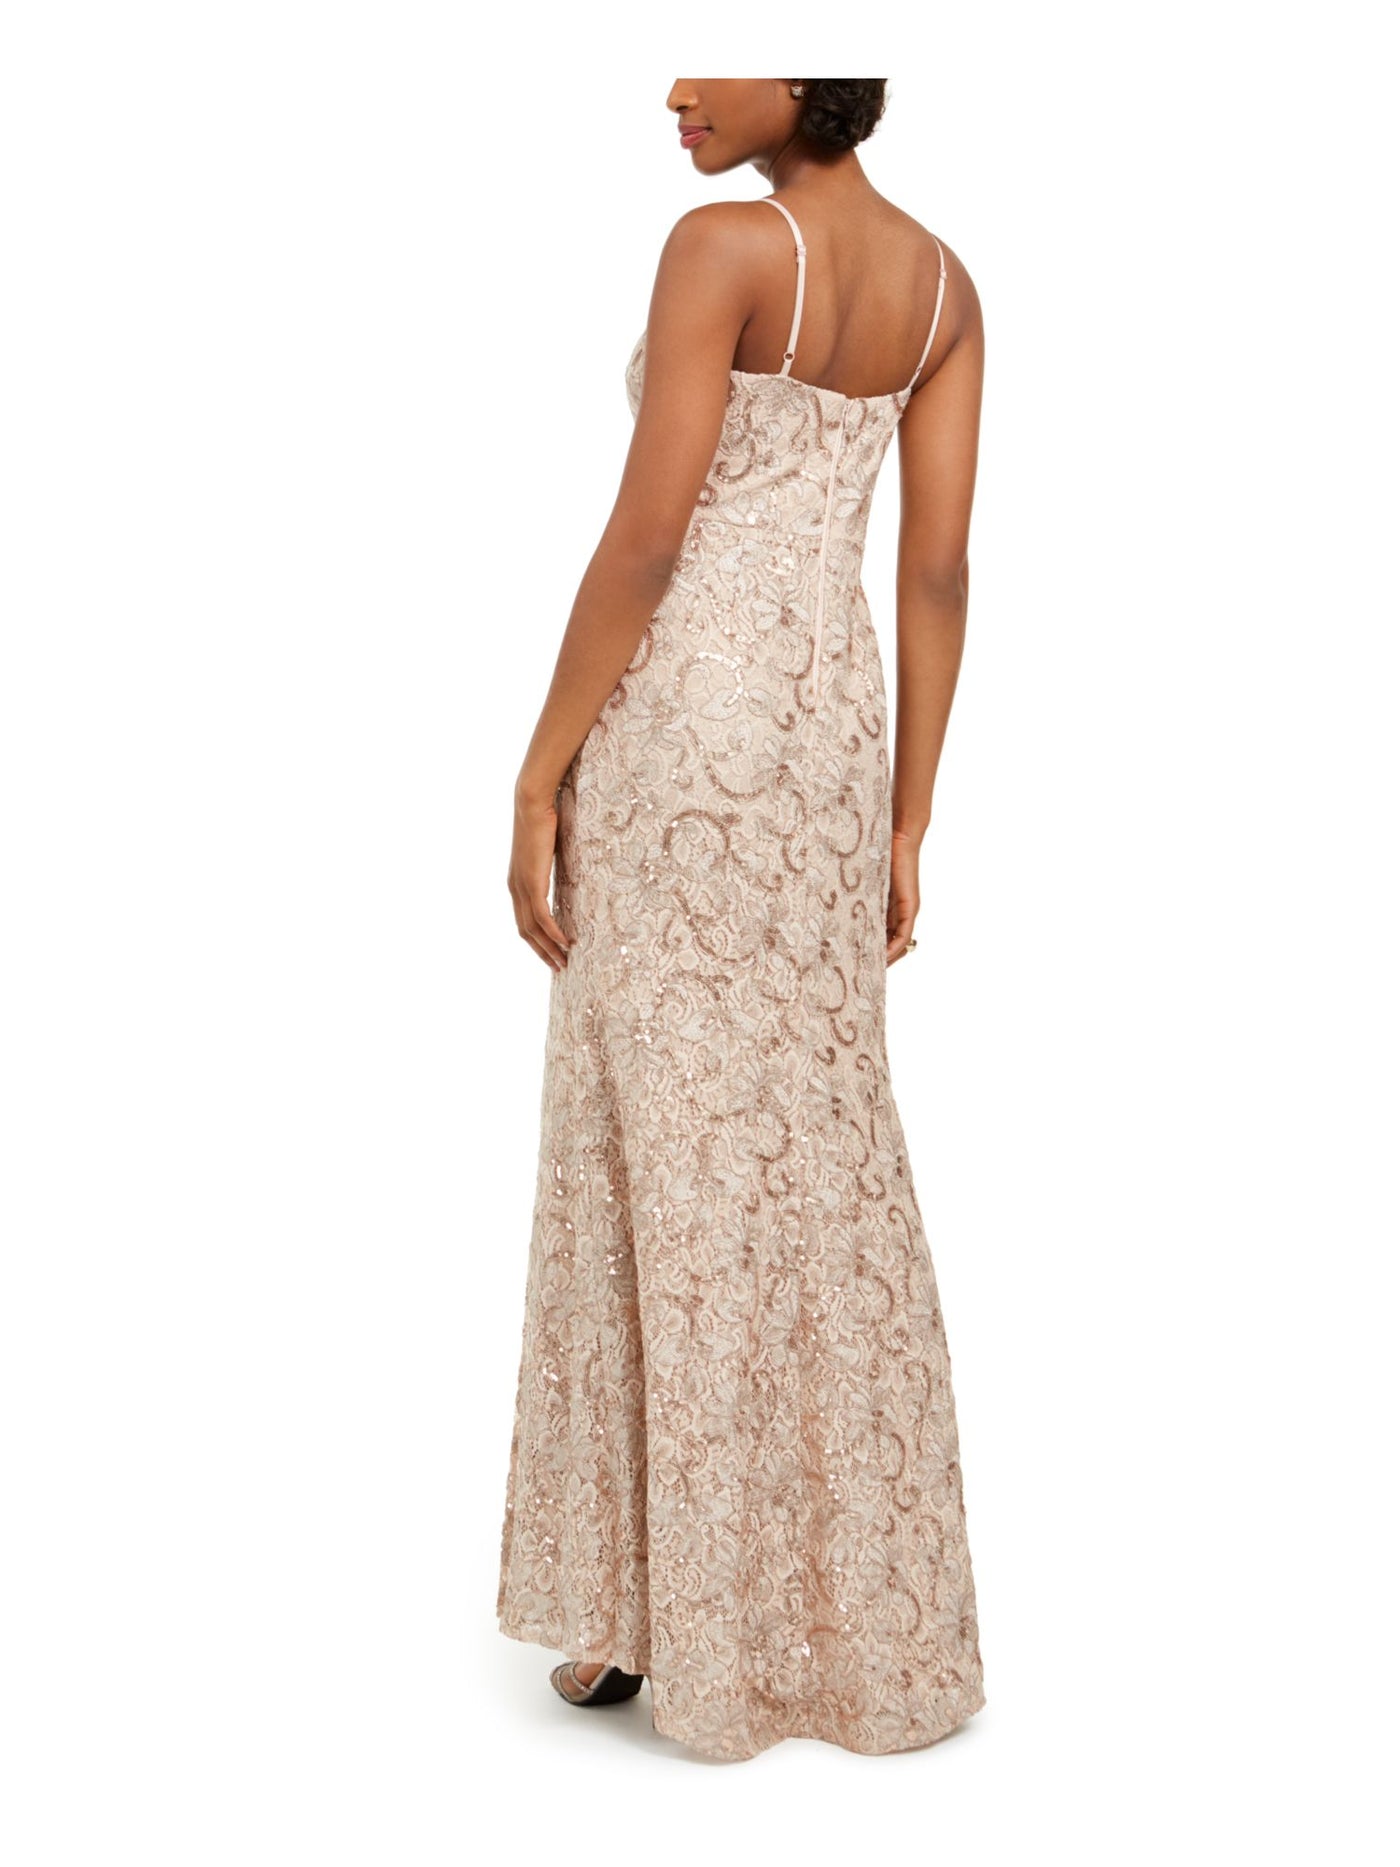 VINCE CAMUTO Womens Beige Sequined Lace Floral Spaghetti Strap V Neck Full-Length Formal Sheath Dress 8